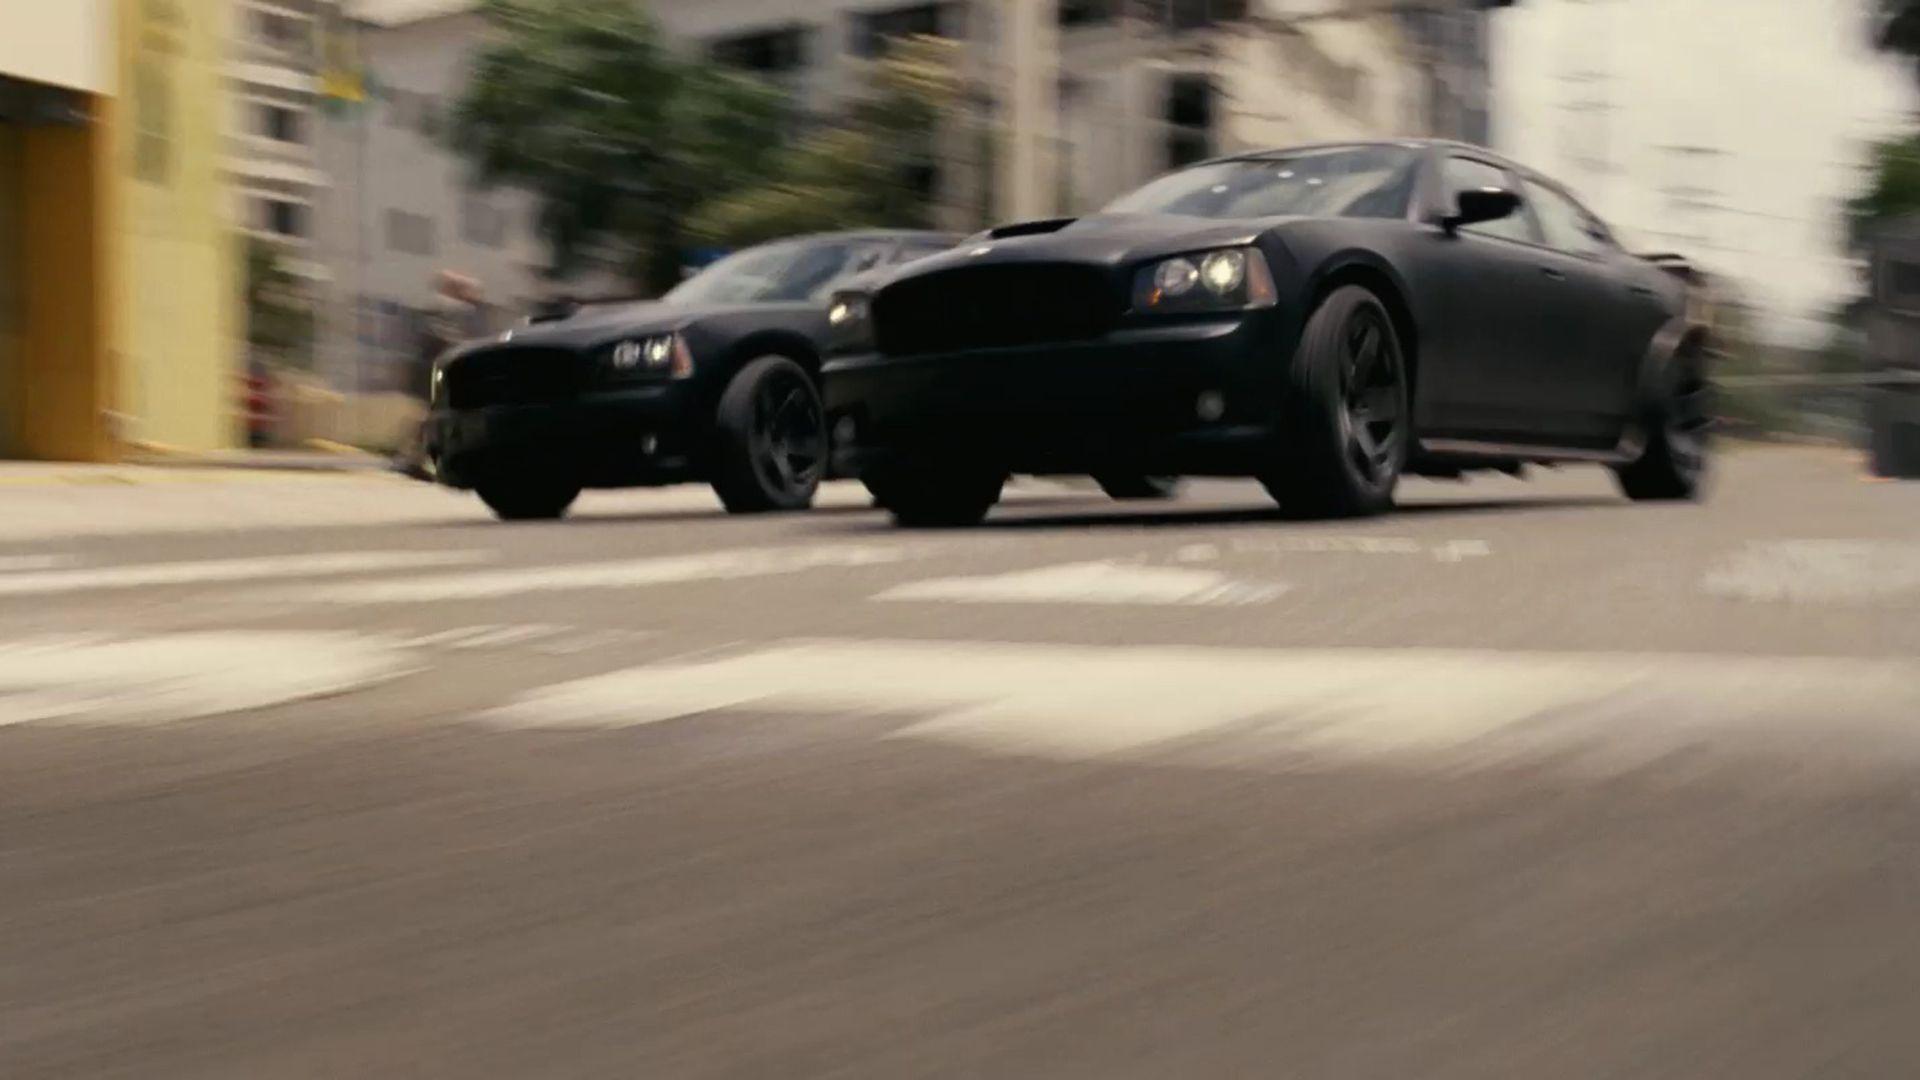 fast five wallpapers